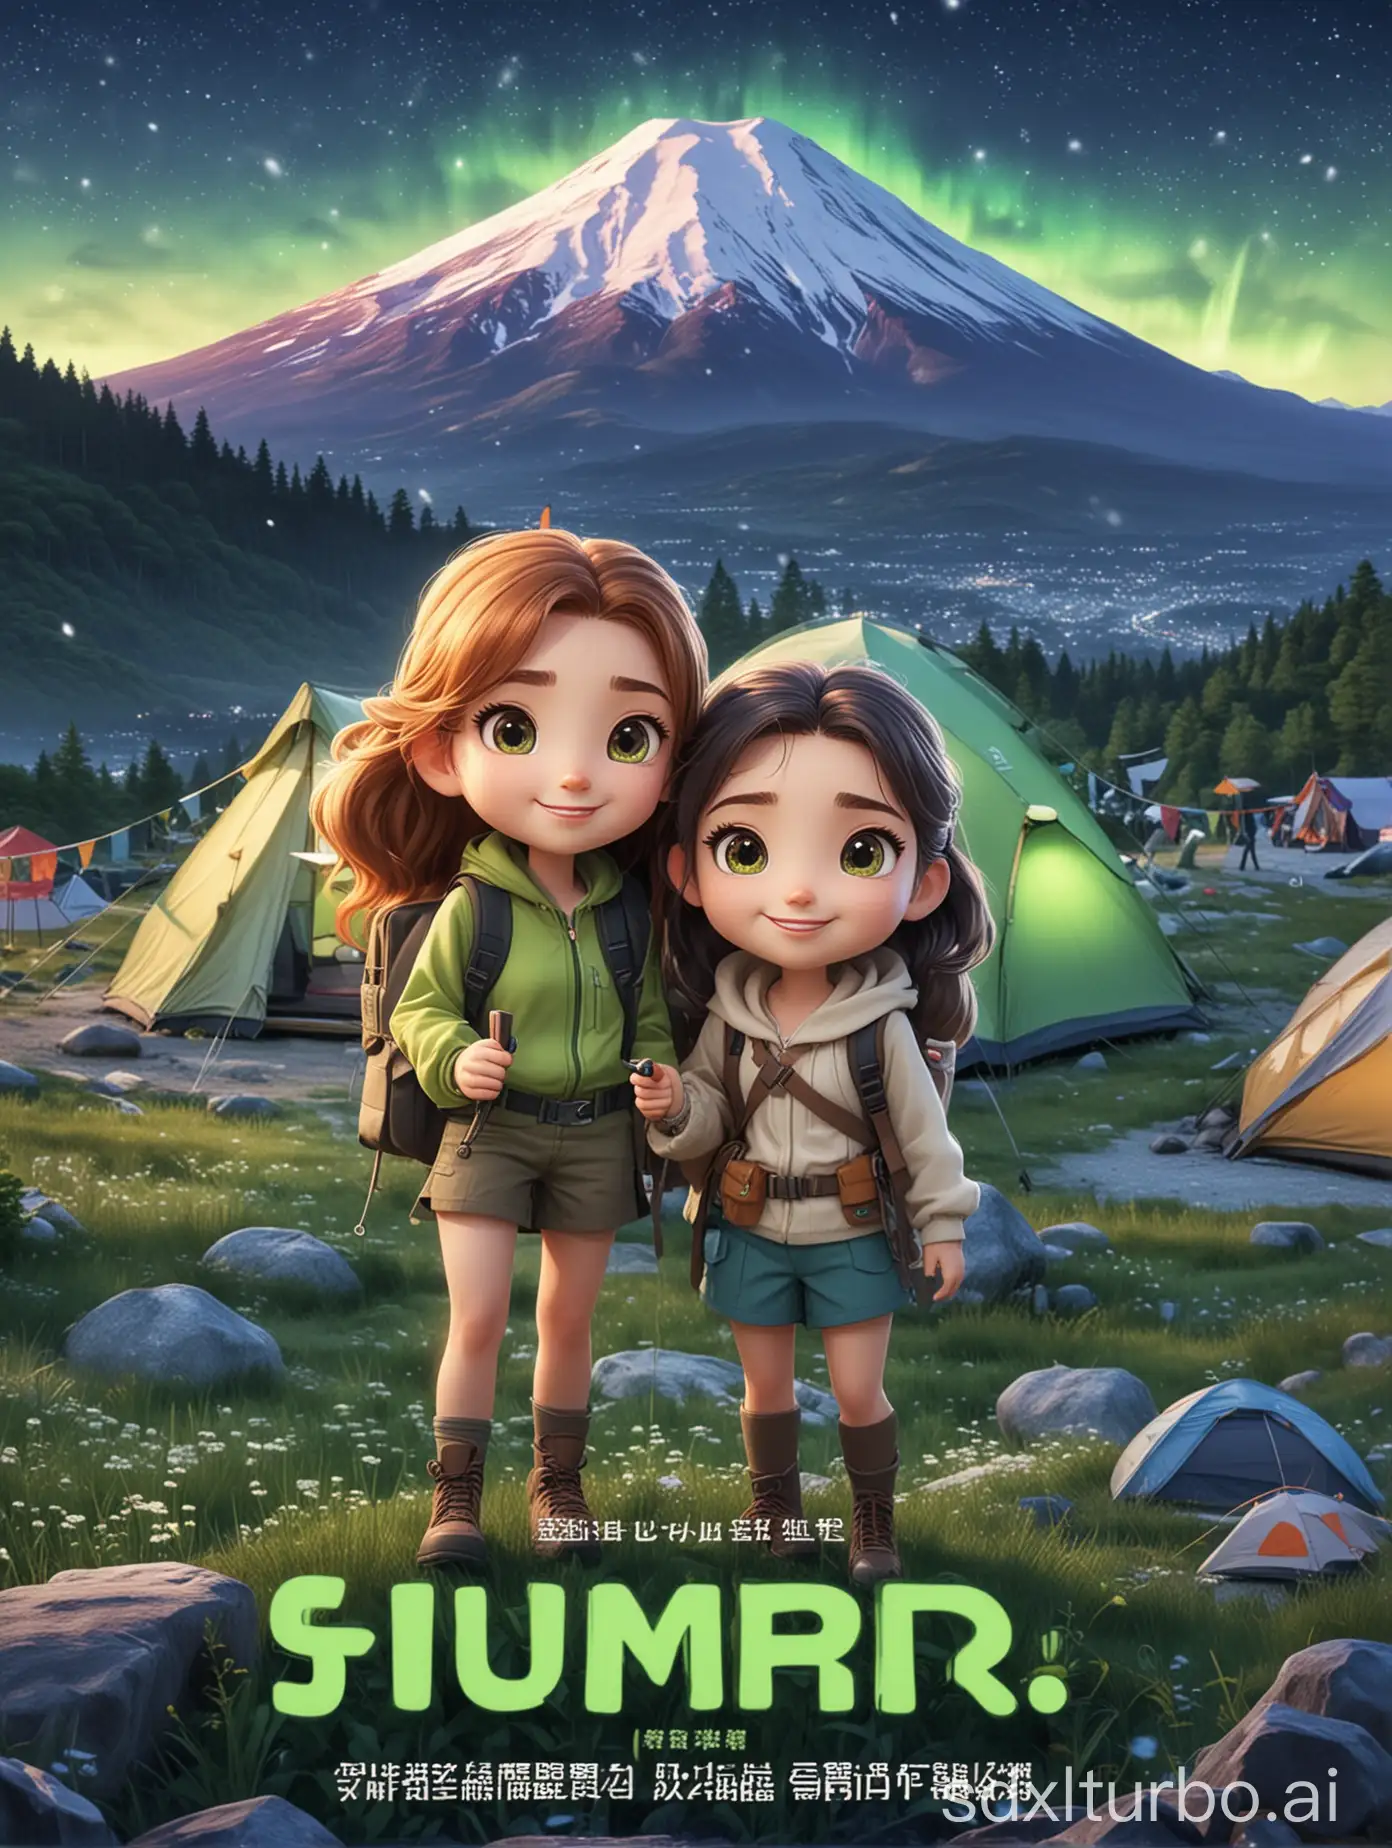 Masterful-Cartoon-Character-Photography-Cute-Girls-Travel-Poster-with-Blurred-Night-Snow-Mountain-Background